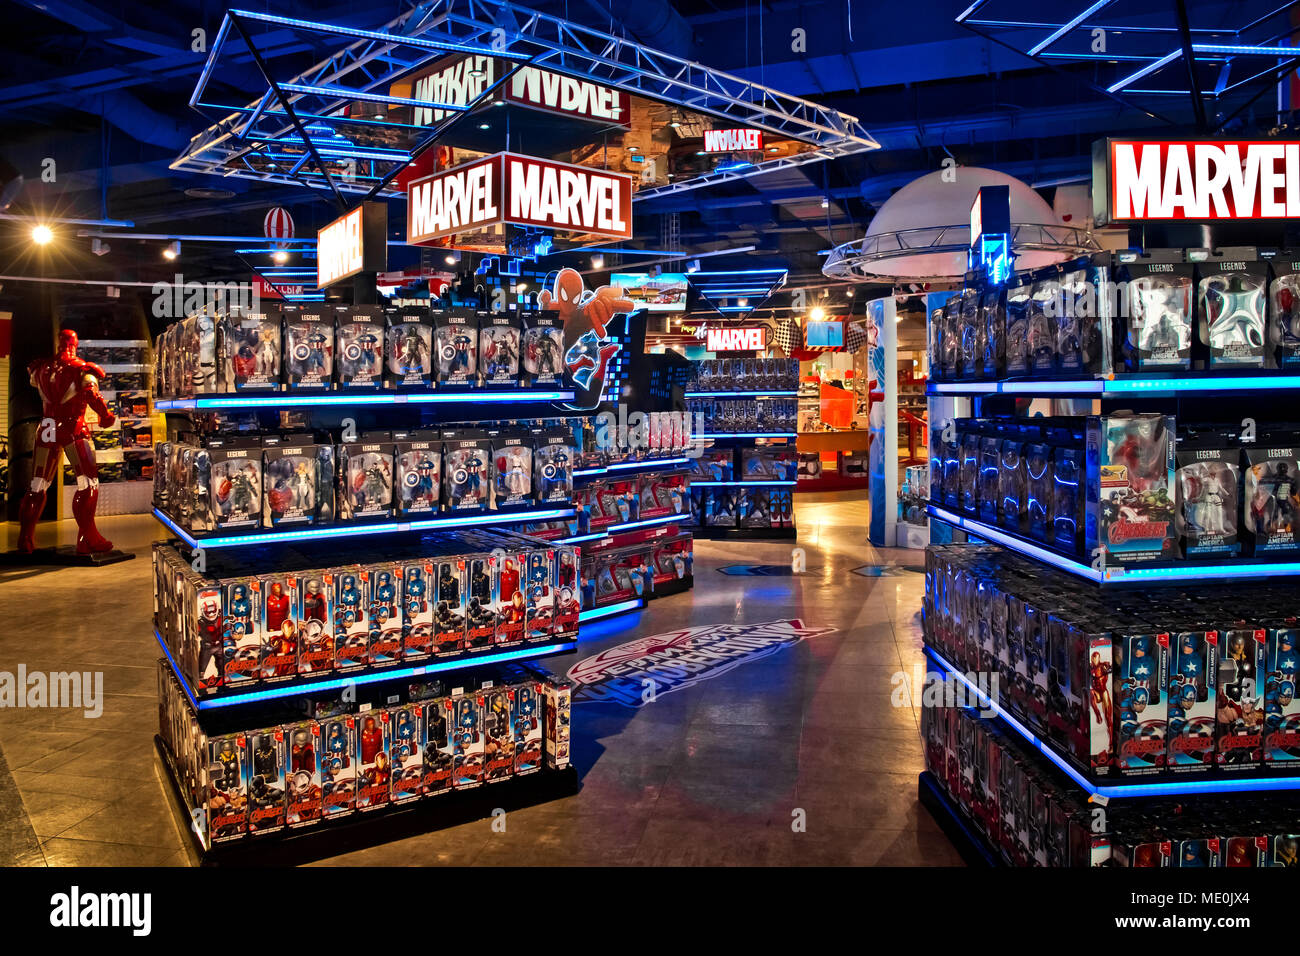 Moscow, Russia - March, 2018: Interior of Marvel toys department in Hamleys store. Marvel Comics is a publisher of American comic books and rela Stock Photo - Alamy